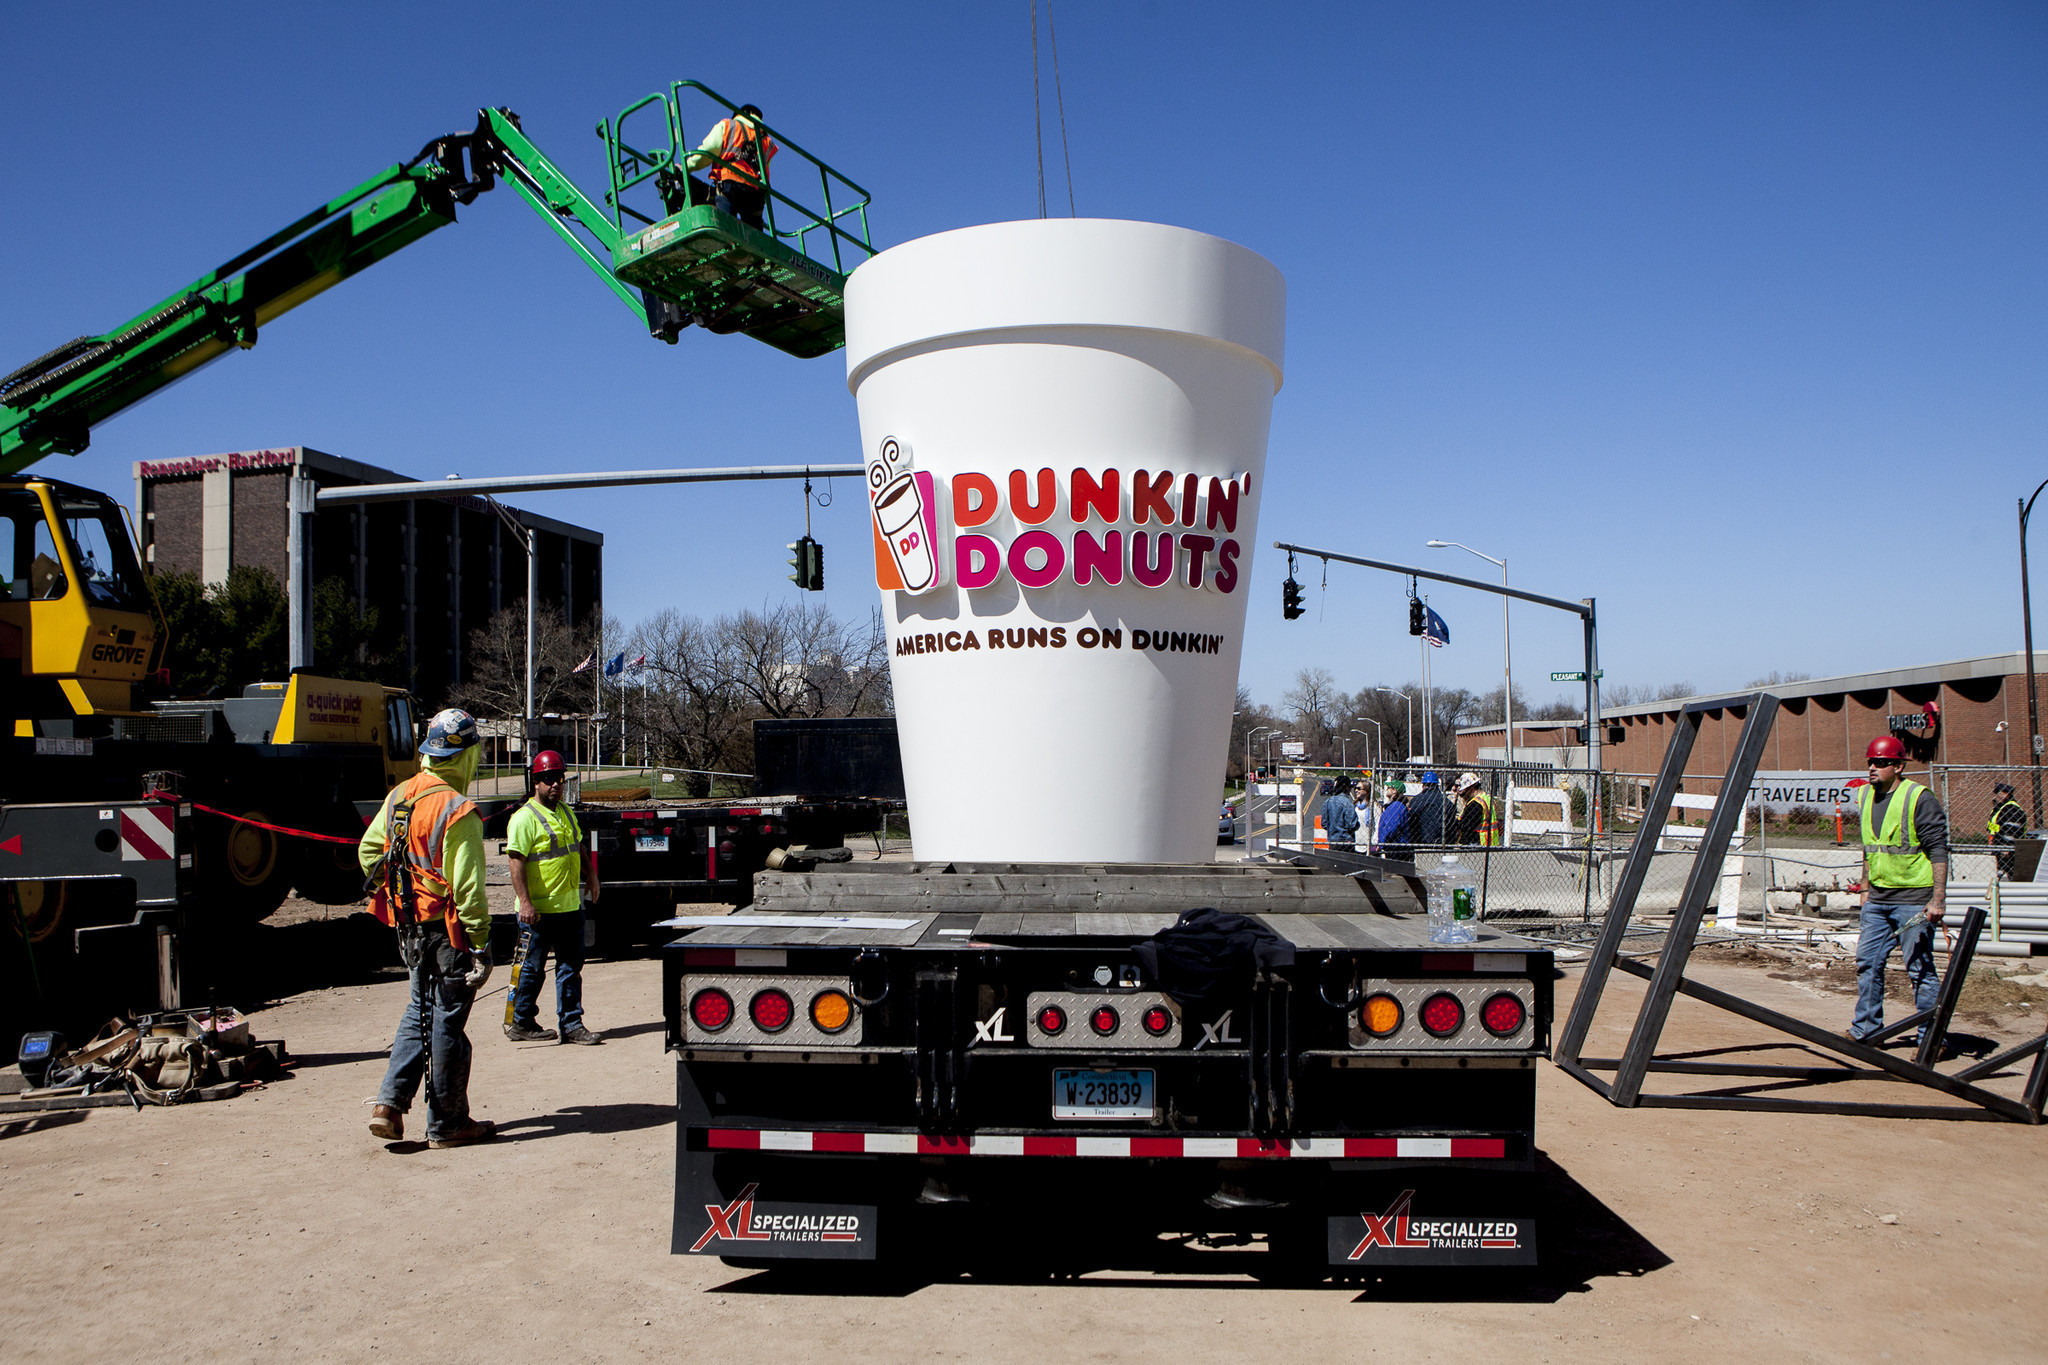 hc-giant-dunkin-donuts-cup-raised-at-yard-goats-stadium-20160415